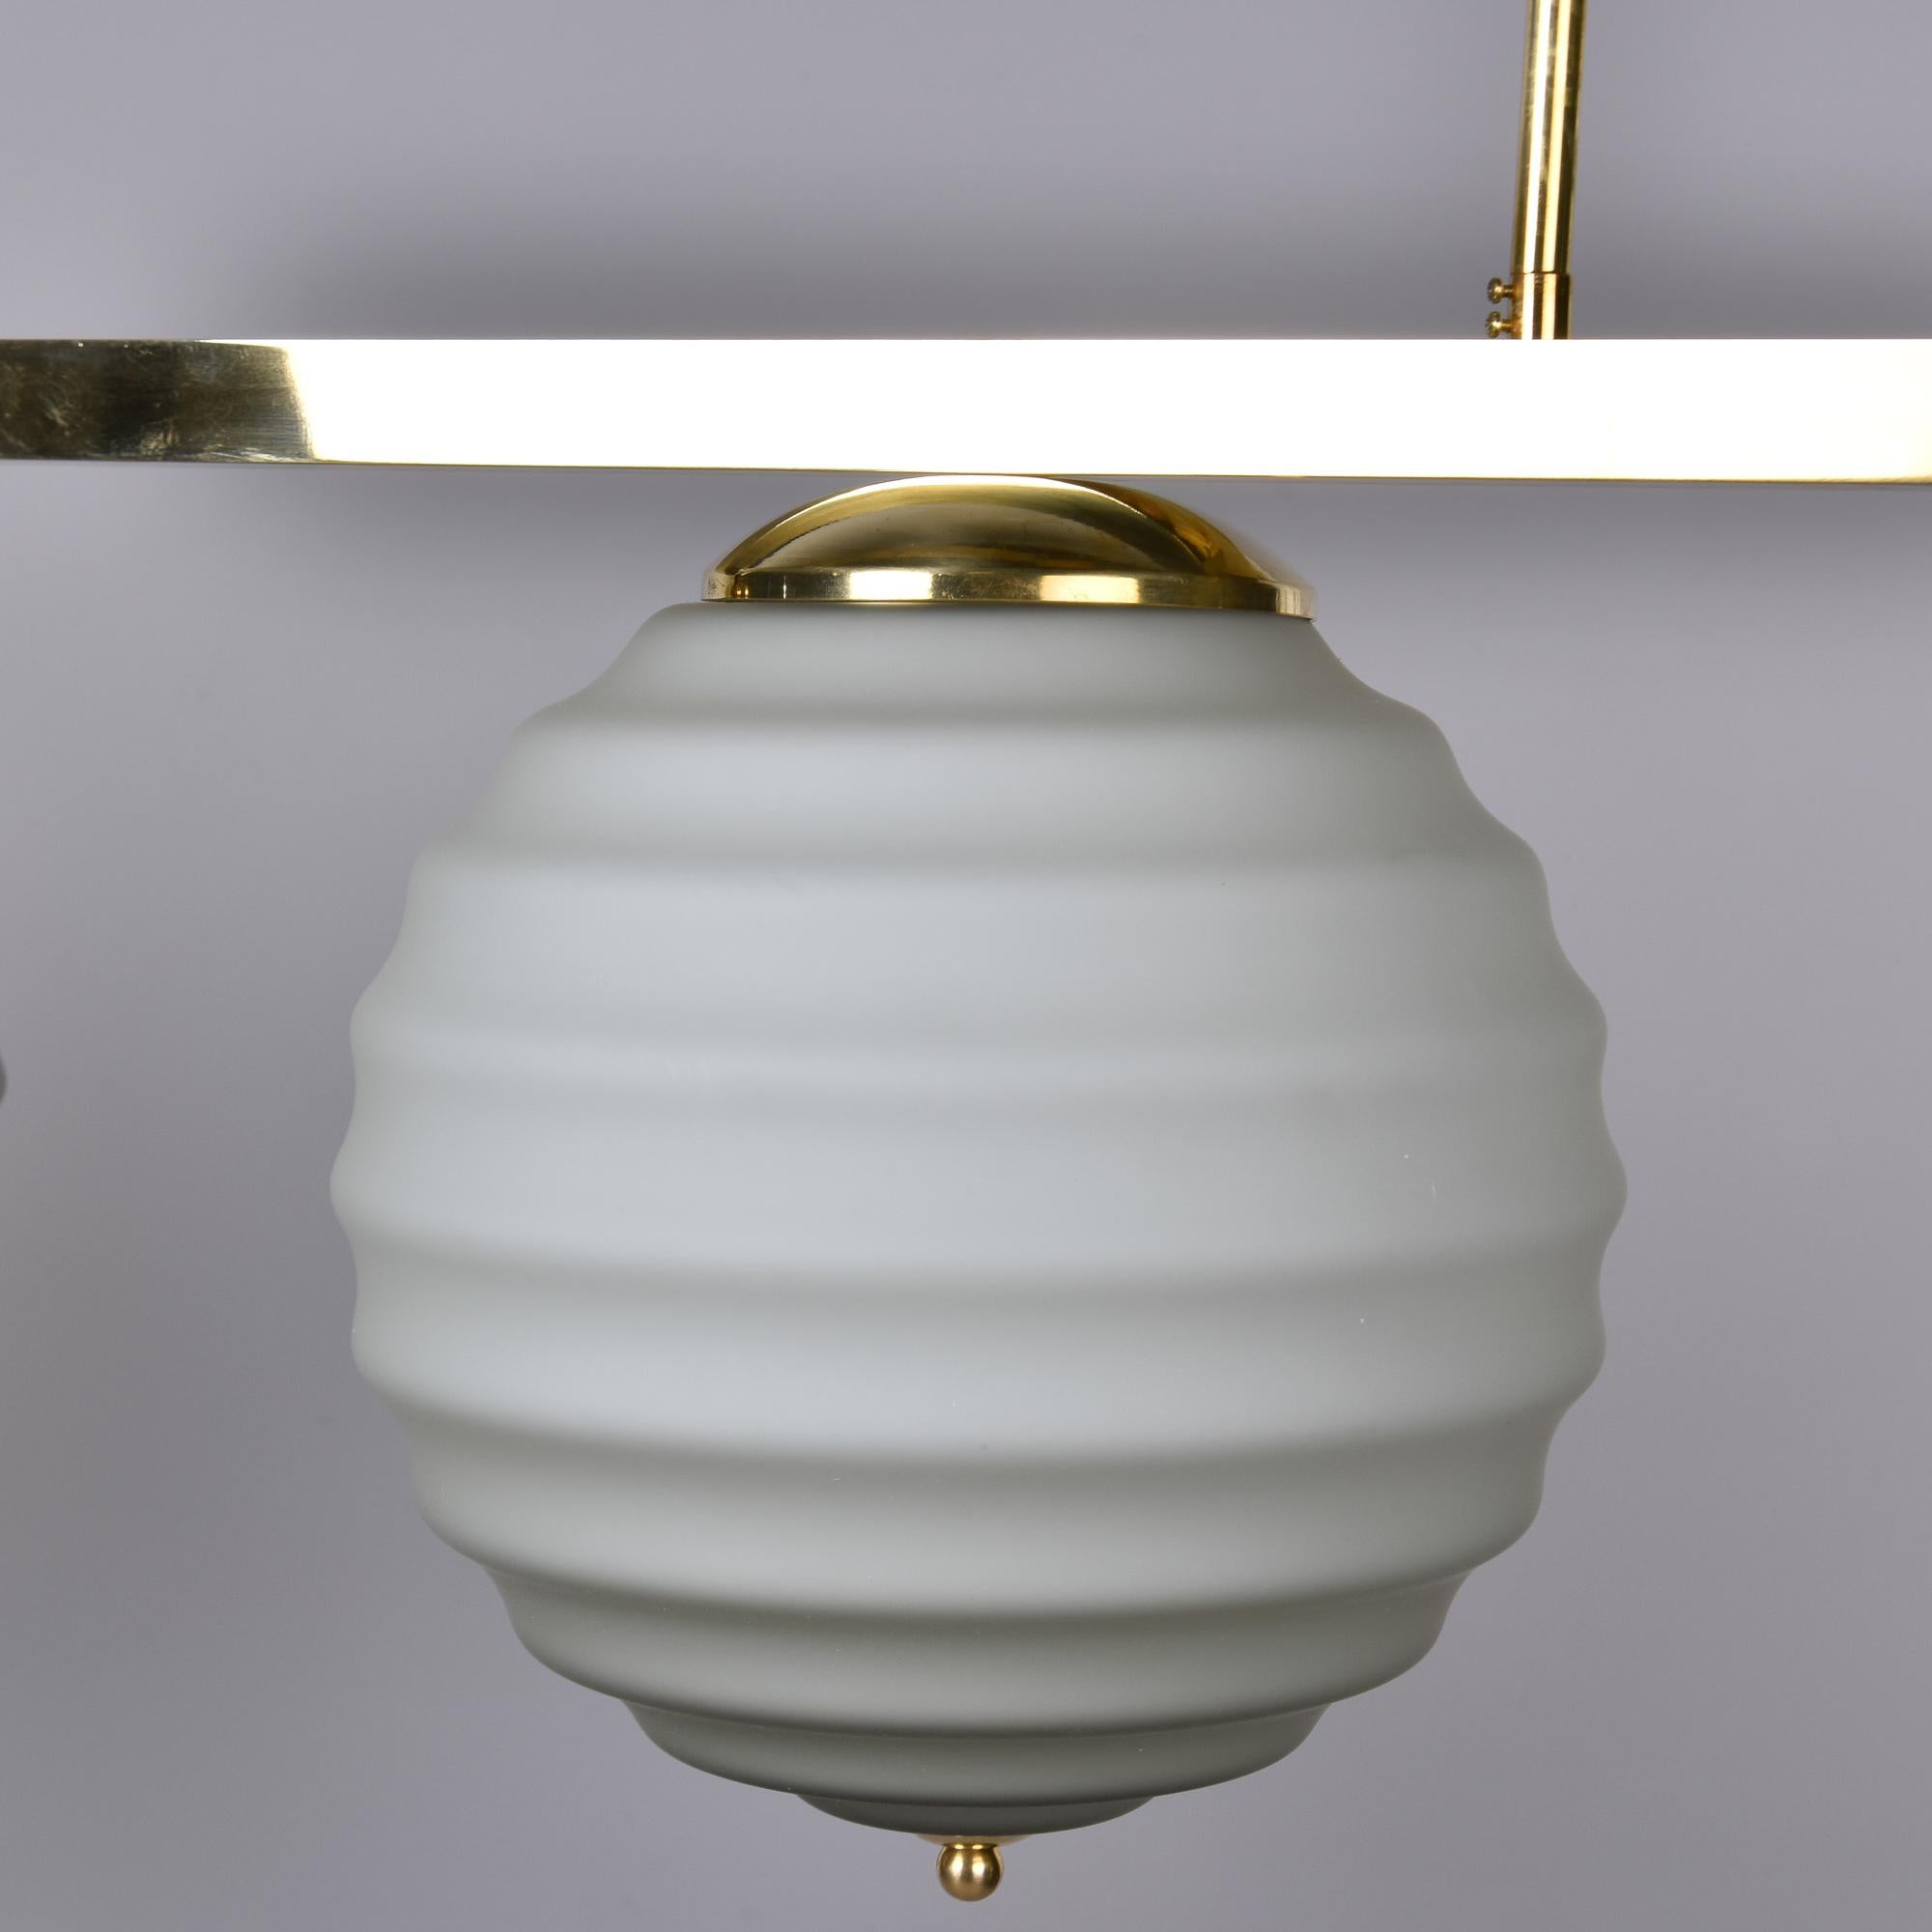 New Italian Fixture with Four Pale Taupe Globes on Horizontal Brass Bar For Sale 3